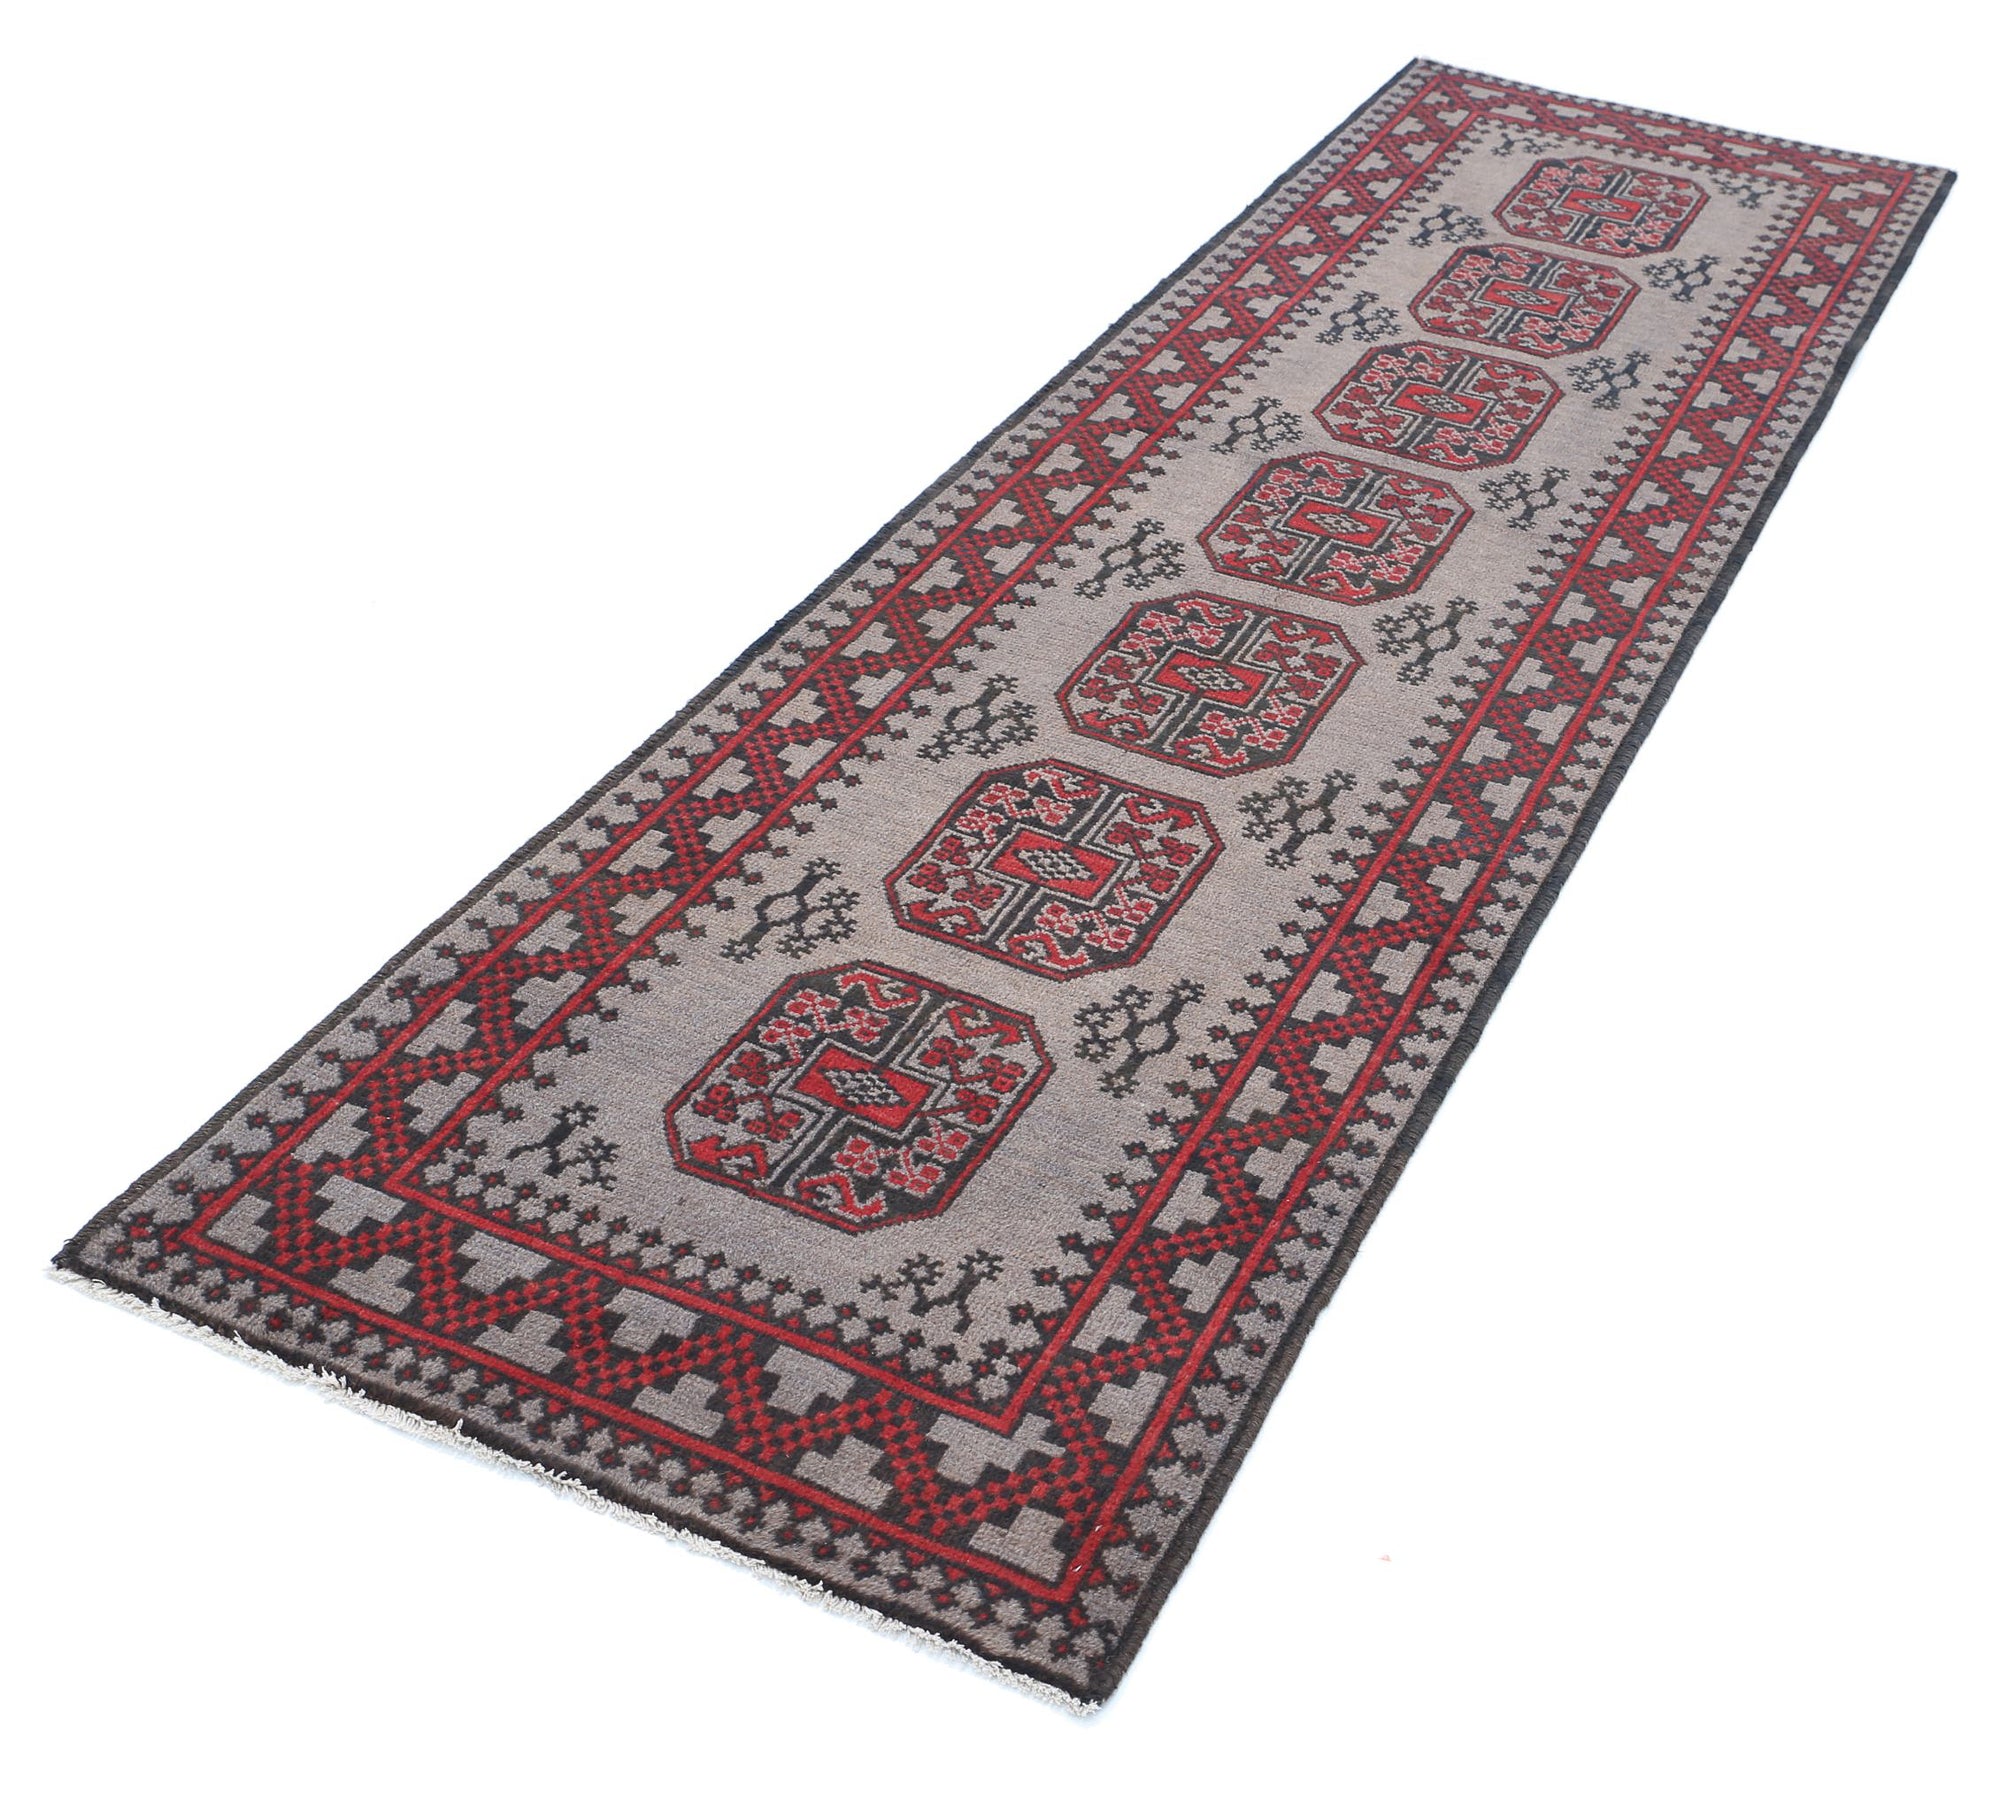 Revival-hand-knotted-gul-collection-wool-rug-5013995-2.jpg